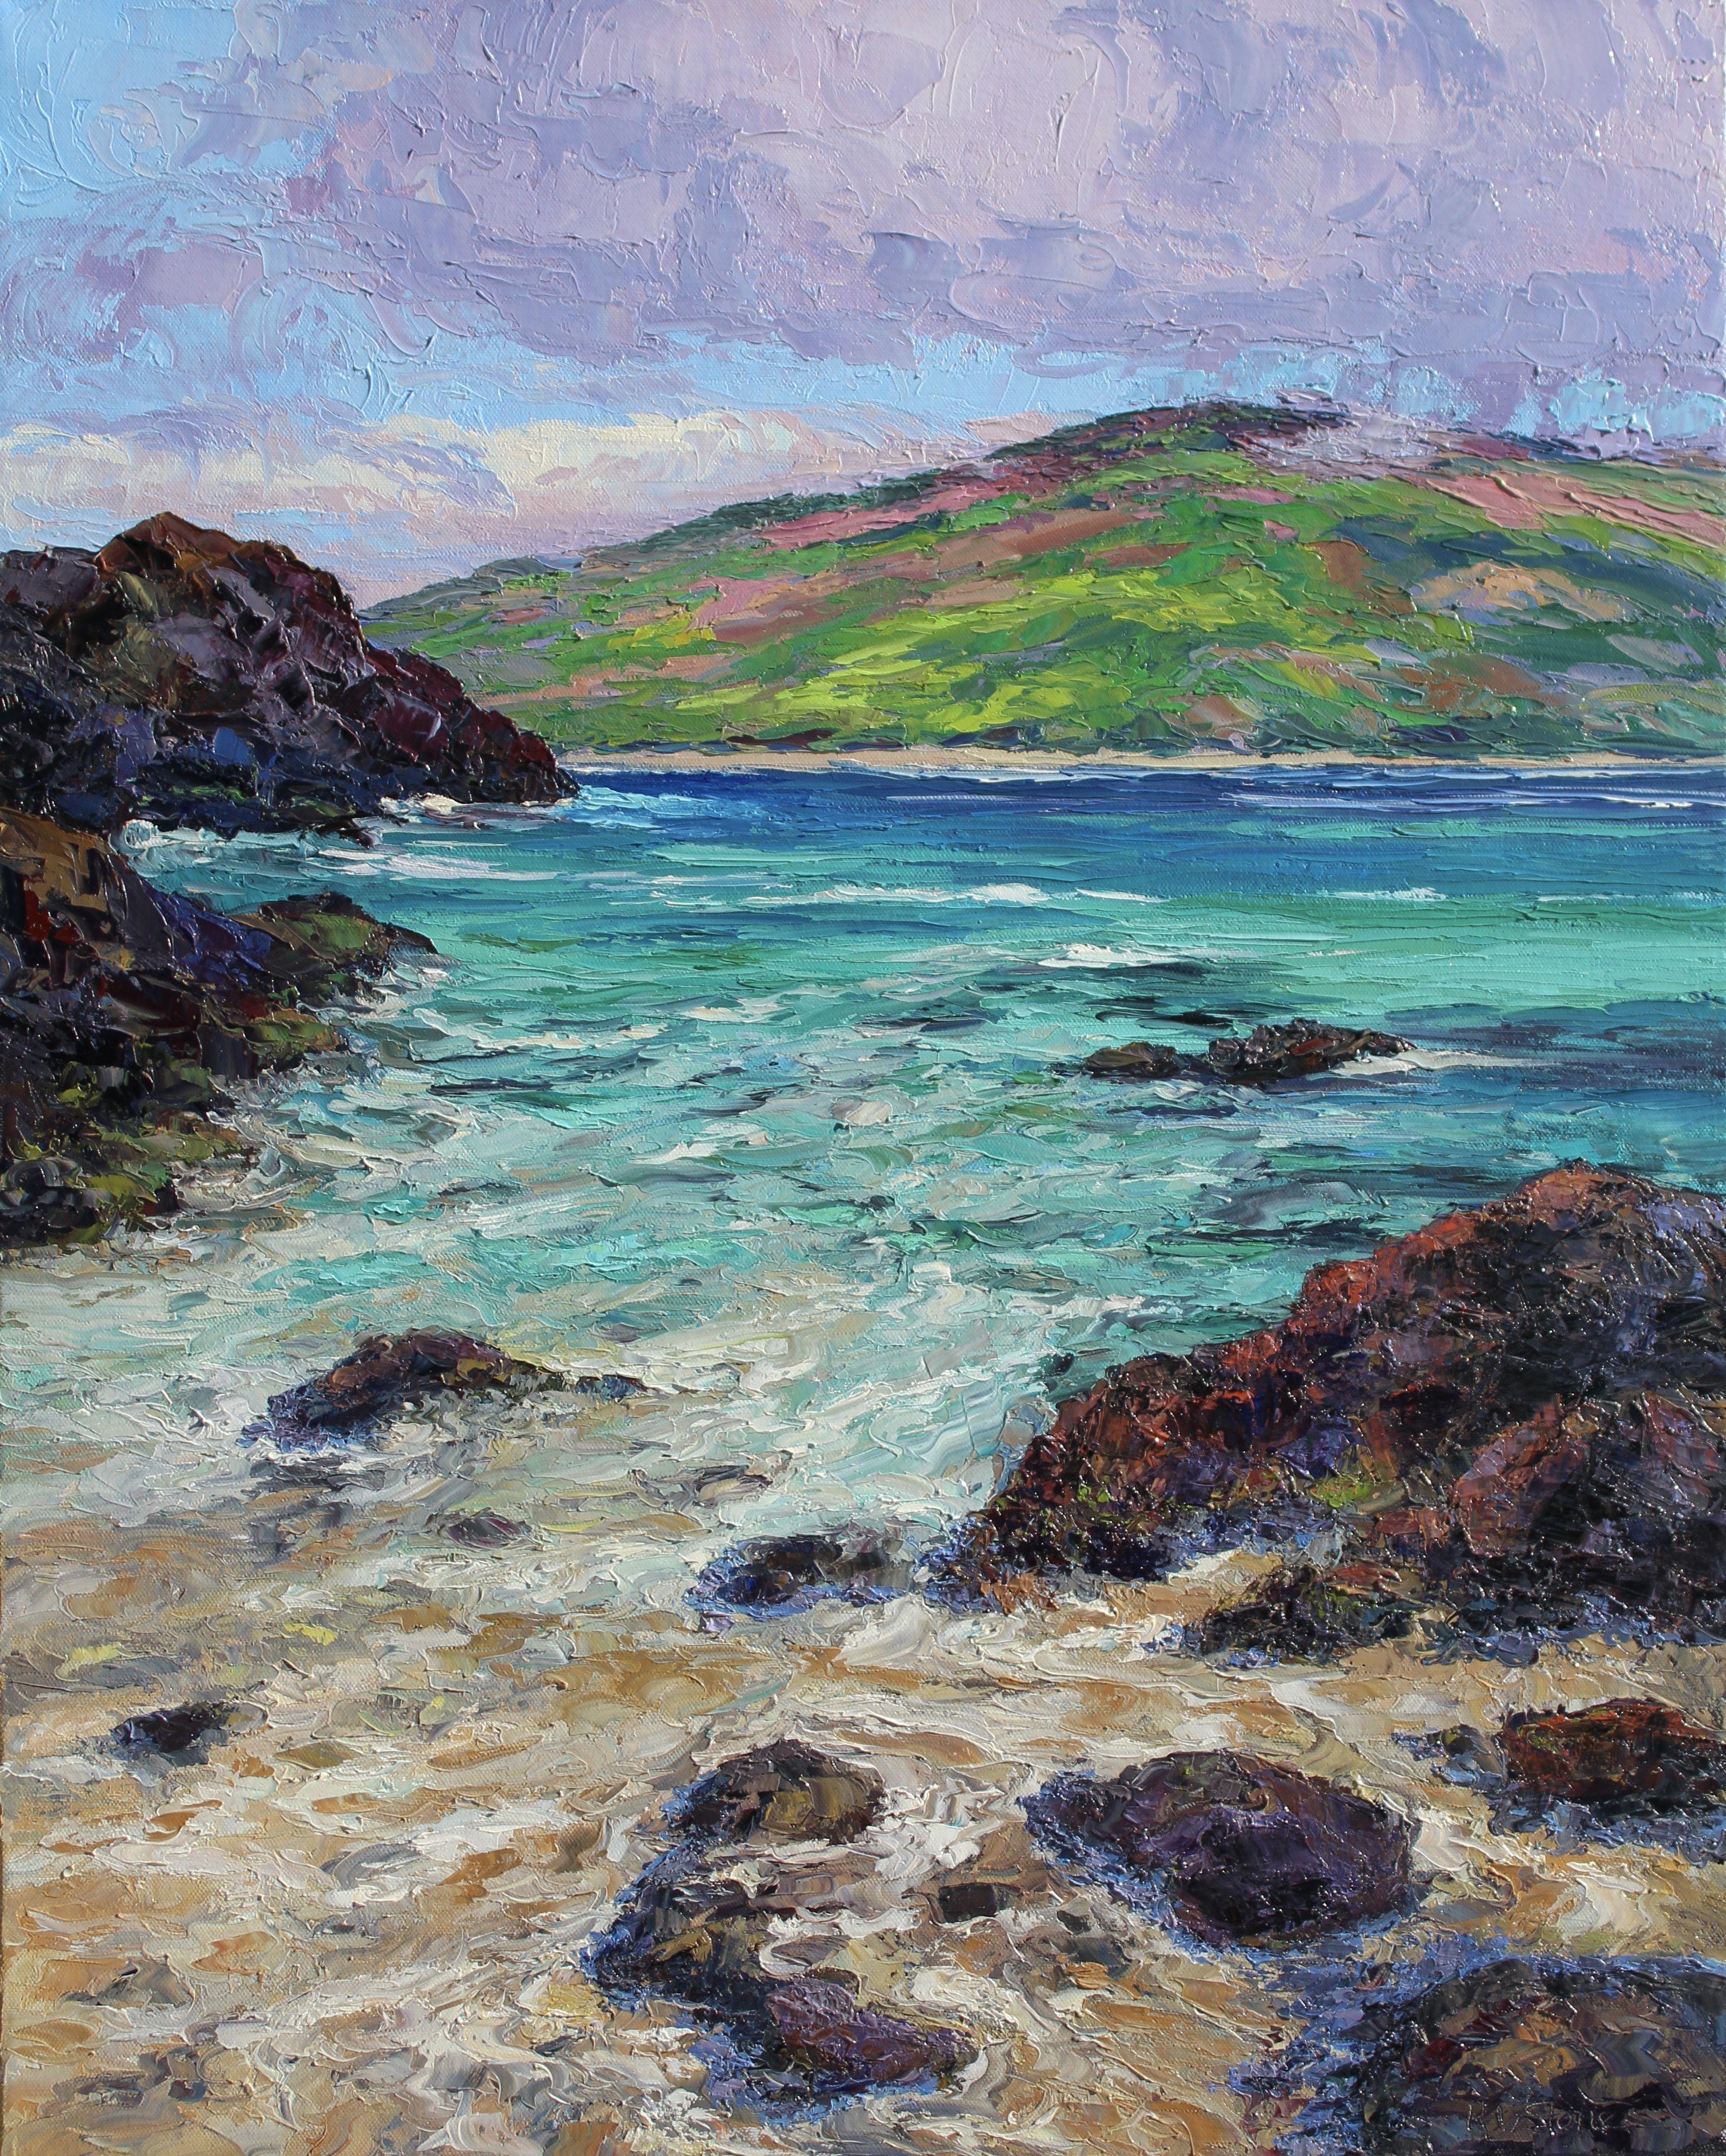 An original palette knife seascape oil painting of Sugar Cove on Maui with a view towards the island of Kahoolawe. Lava sea rocks frame the view of this ocean cove with numerous shades of blue, green and violet. Island clouds drift over the island